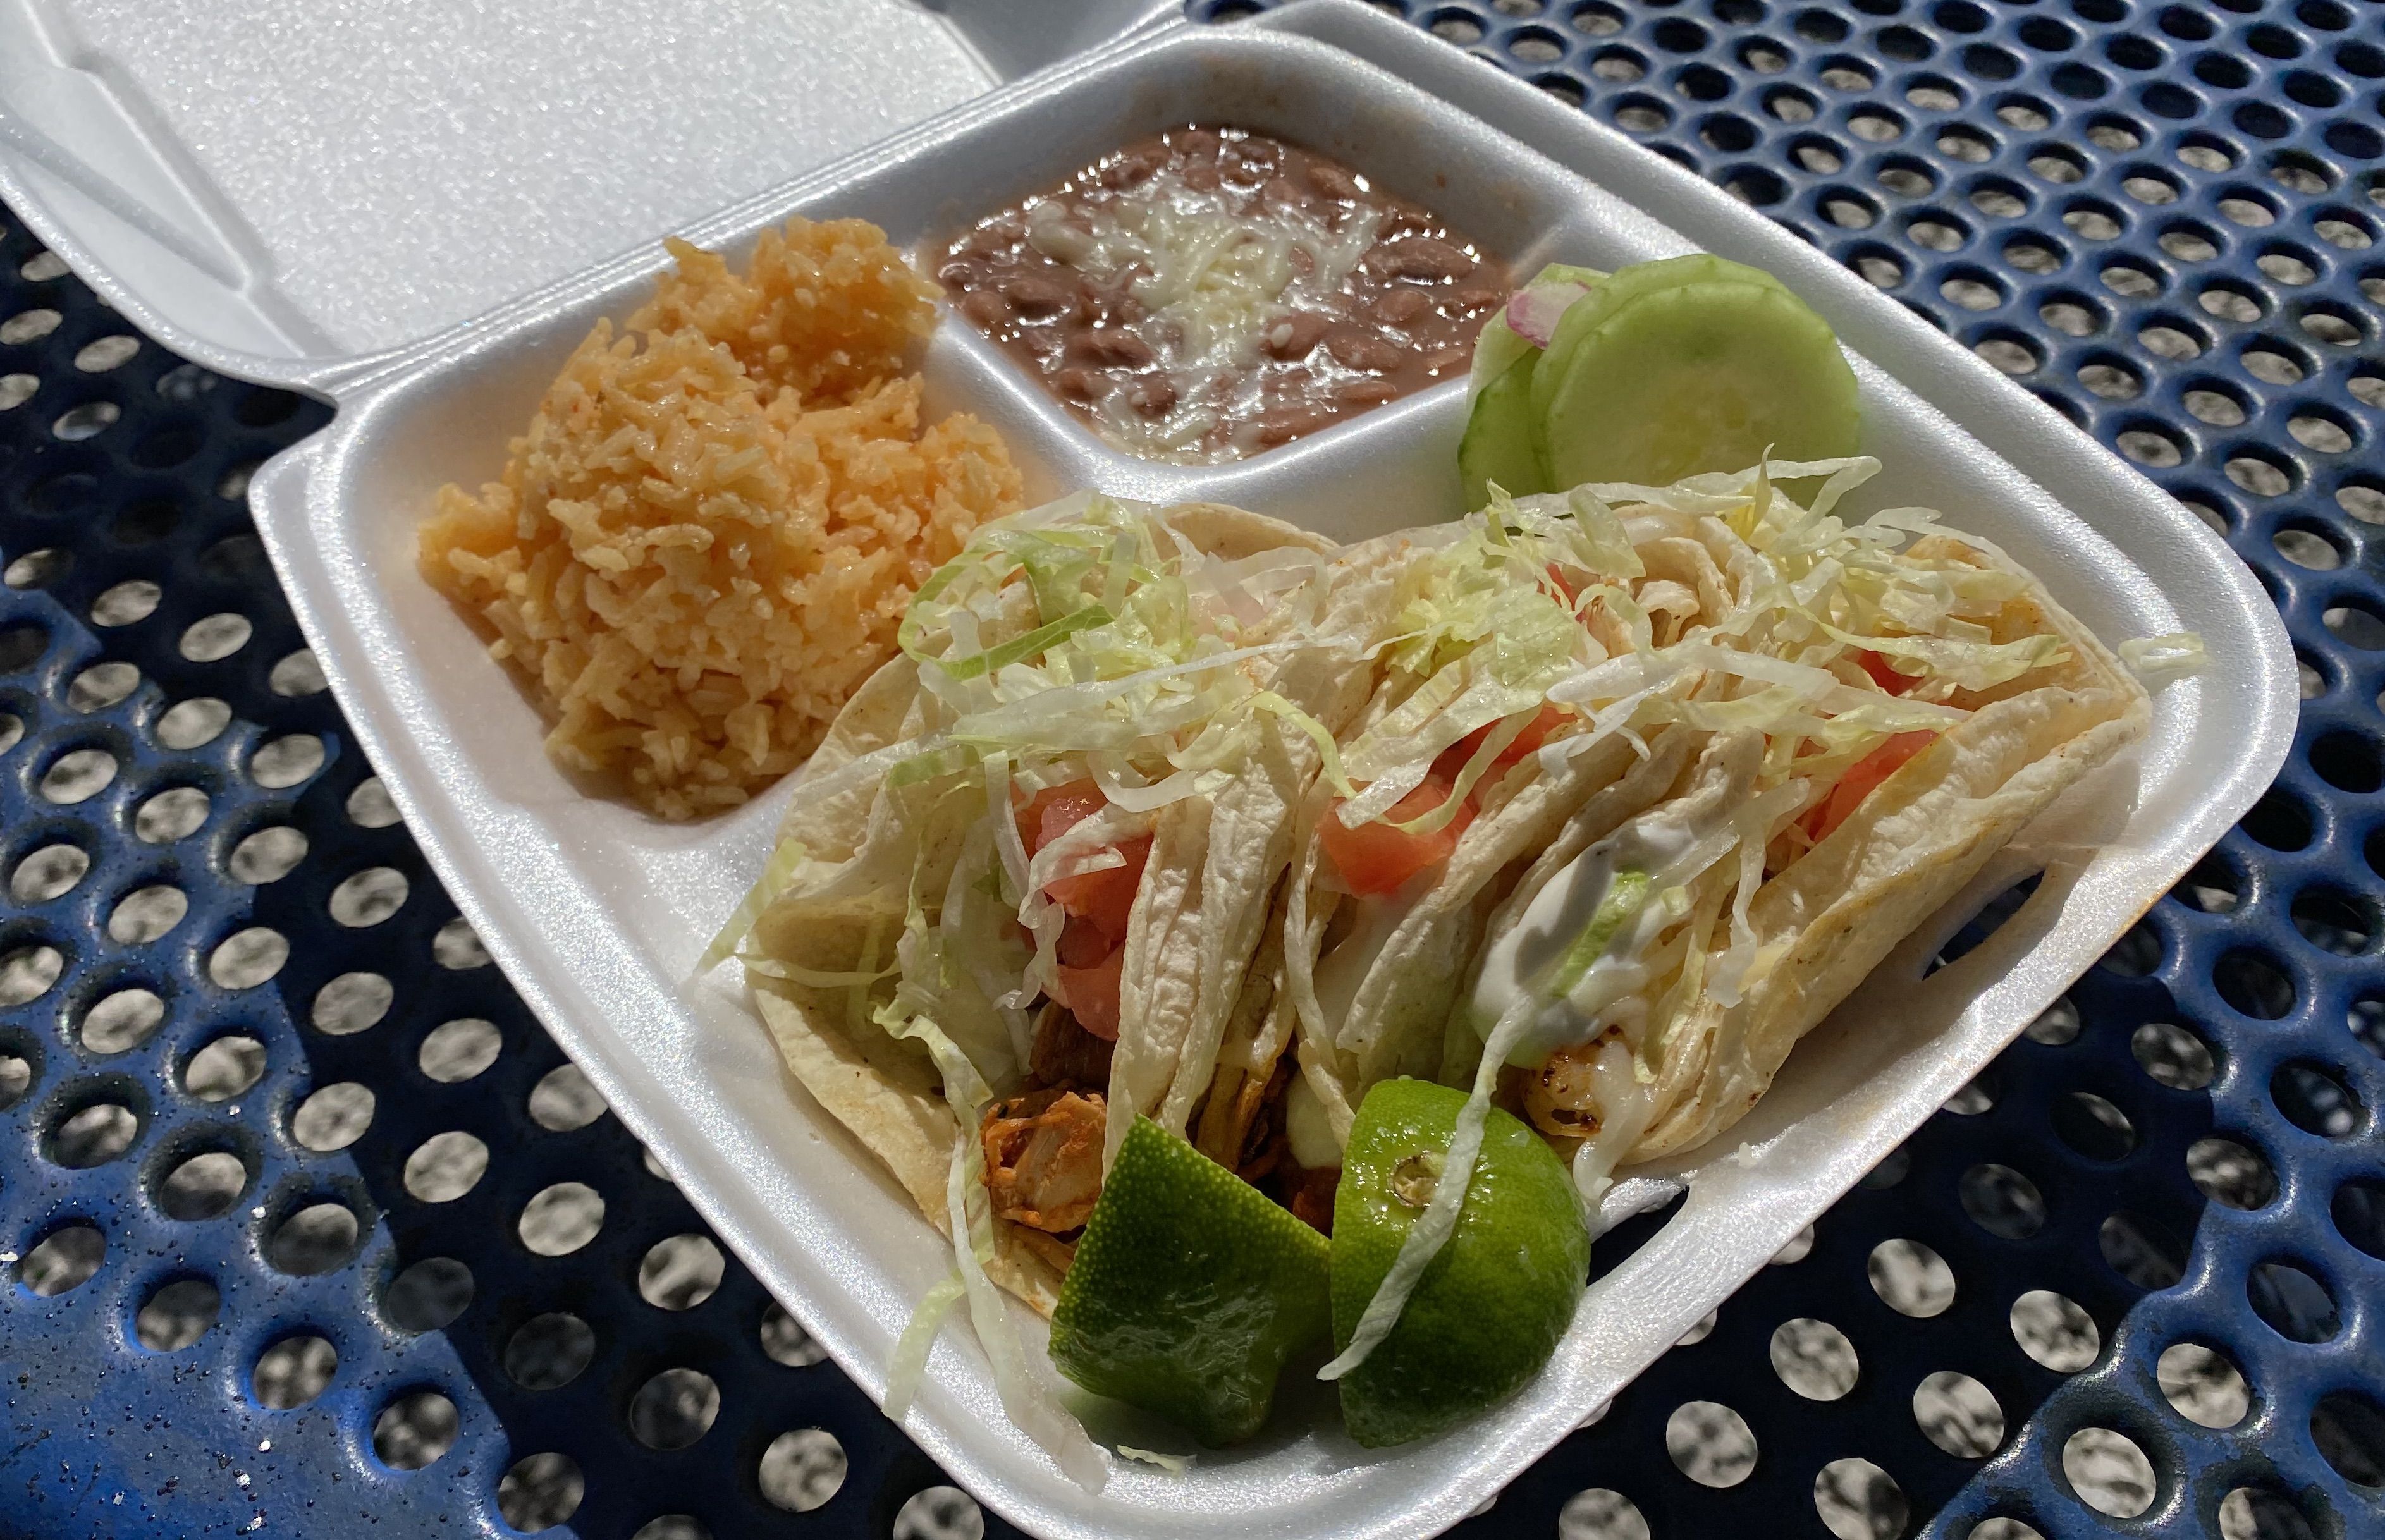 A sytrofoam container with three sections, with tacos, rice and beans